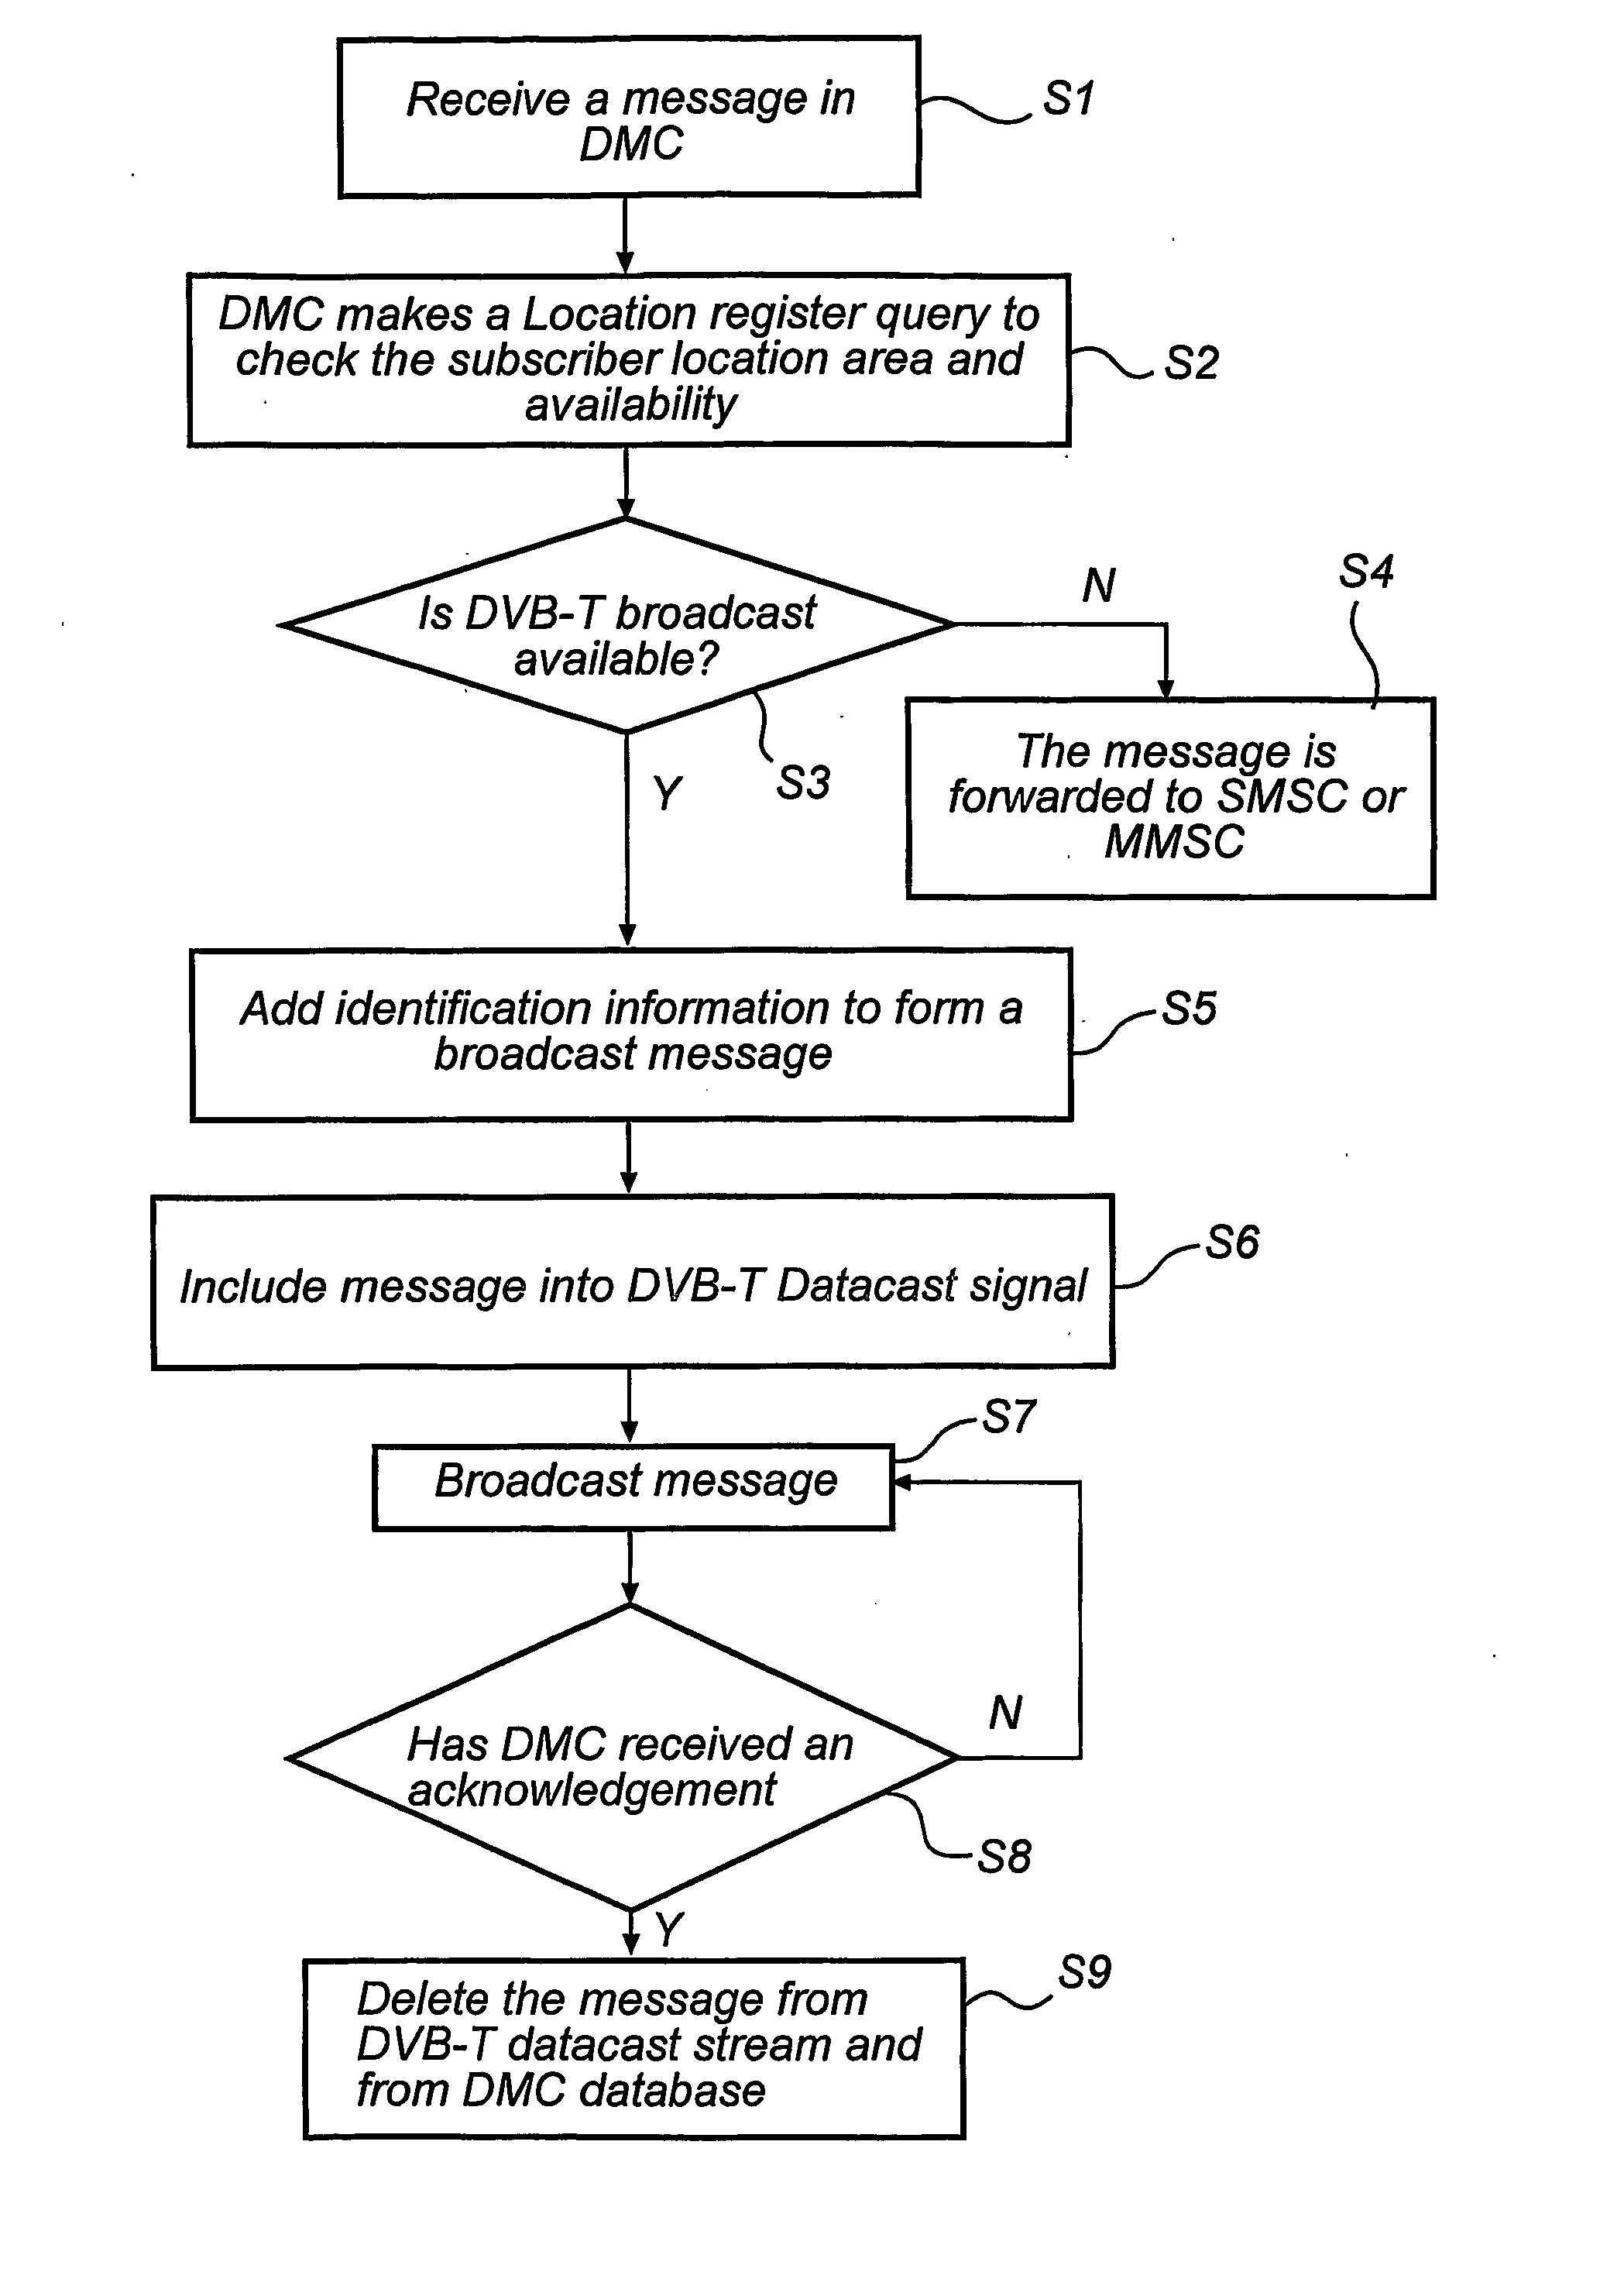 Broadcast messaging in a telecommunication network